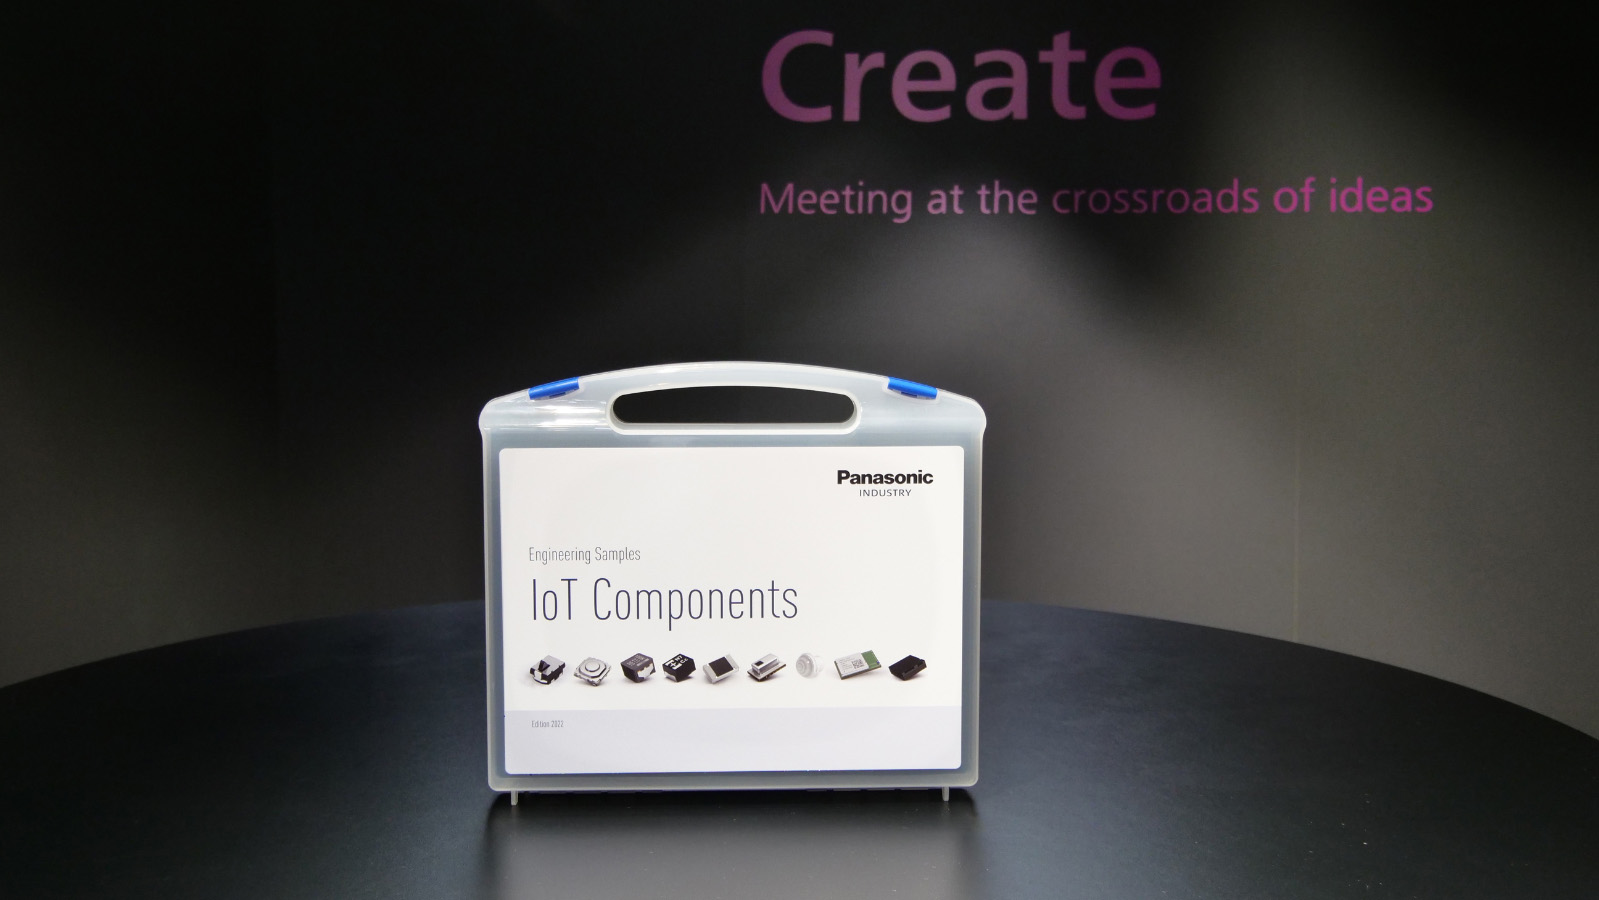 Photo: IoT Components tool kits available at exhibitions and for customers to take with them